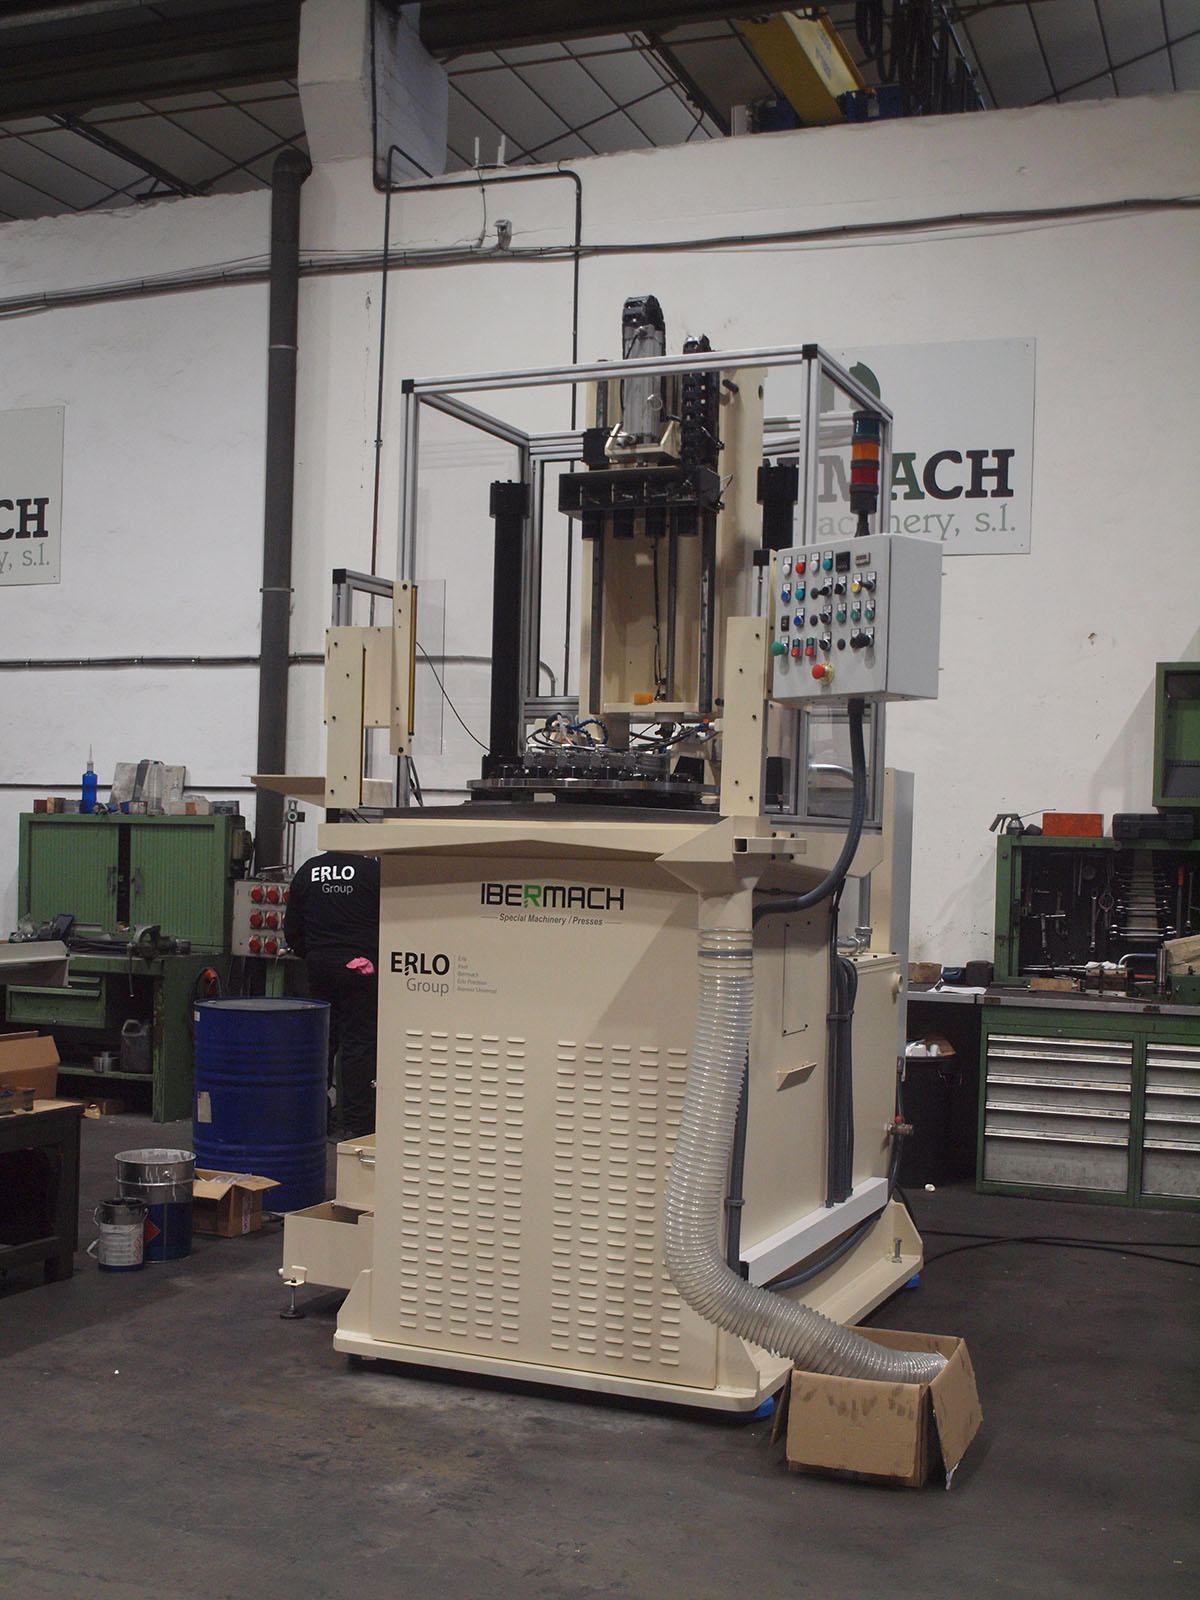 Ibermach designs and manufactures hydraulic presses and broaching machines which can be fully personalised to suit the needs of your industrial project